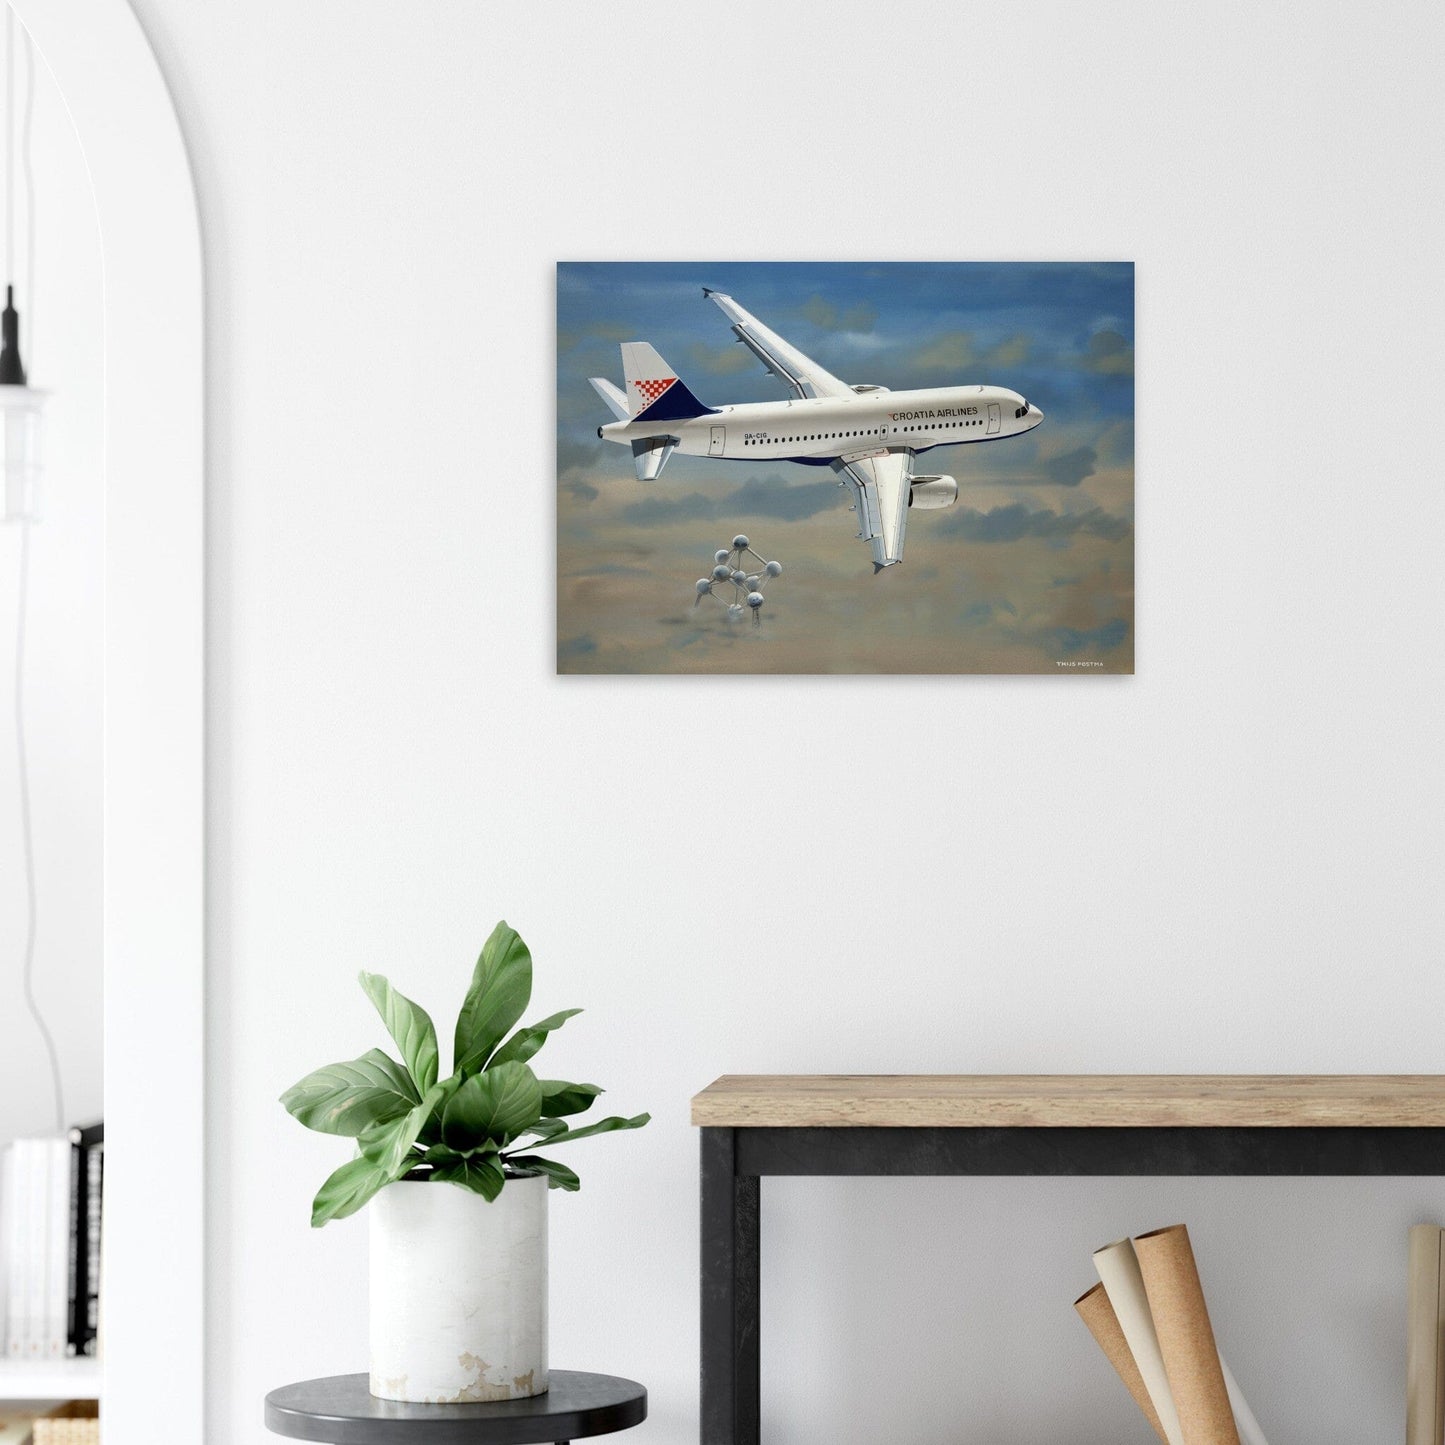 Thijs Postma - Poster - Airbus A319 Croatia Airlines Poster Only TP Aviation Art 